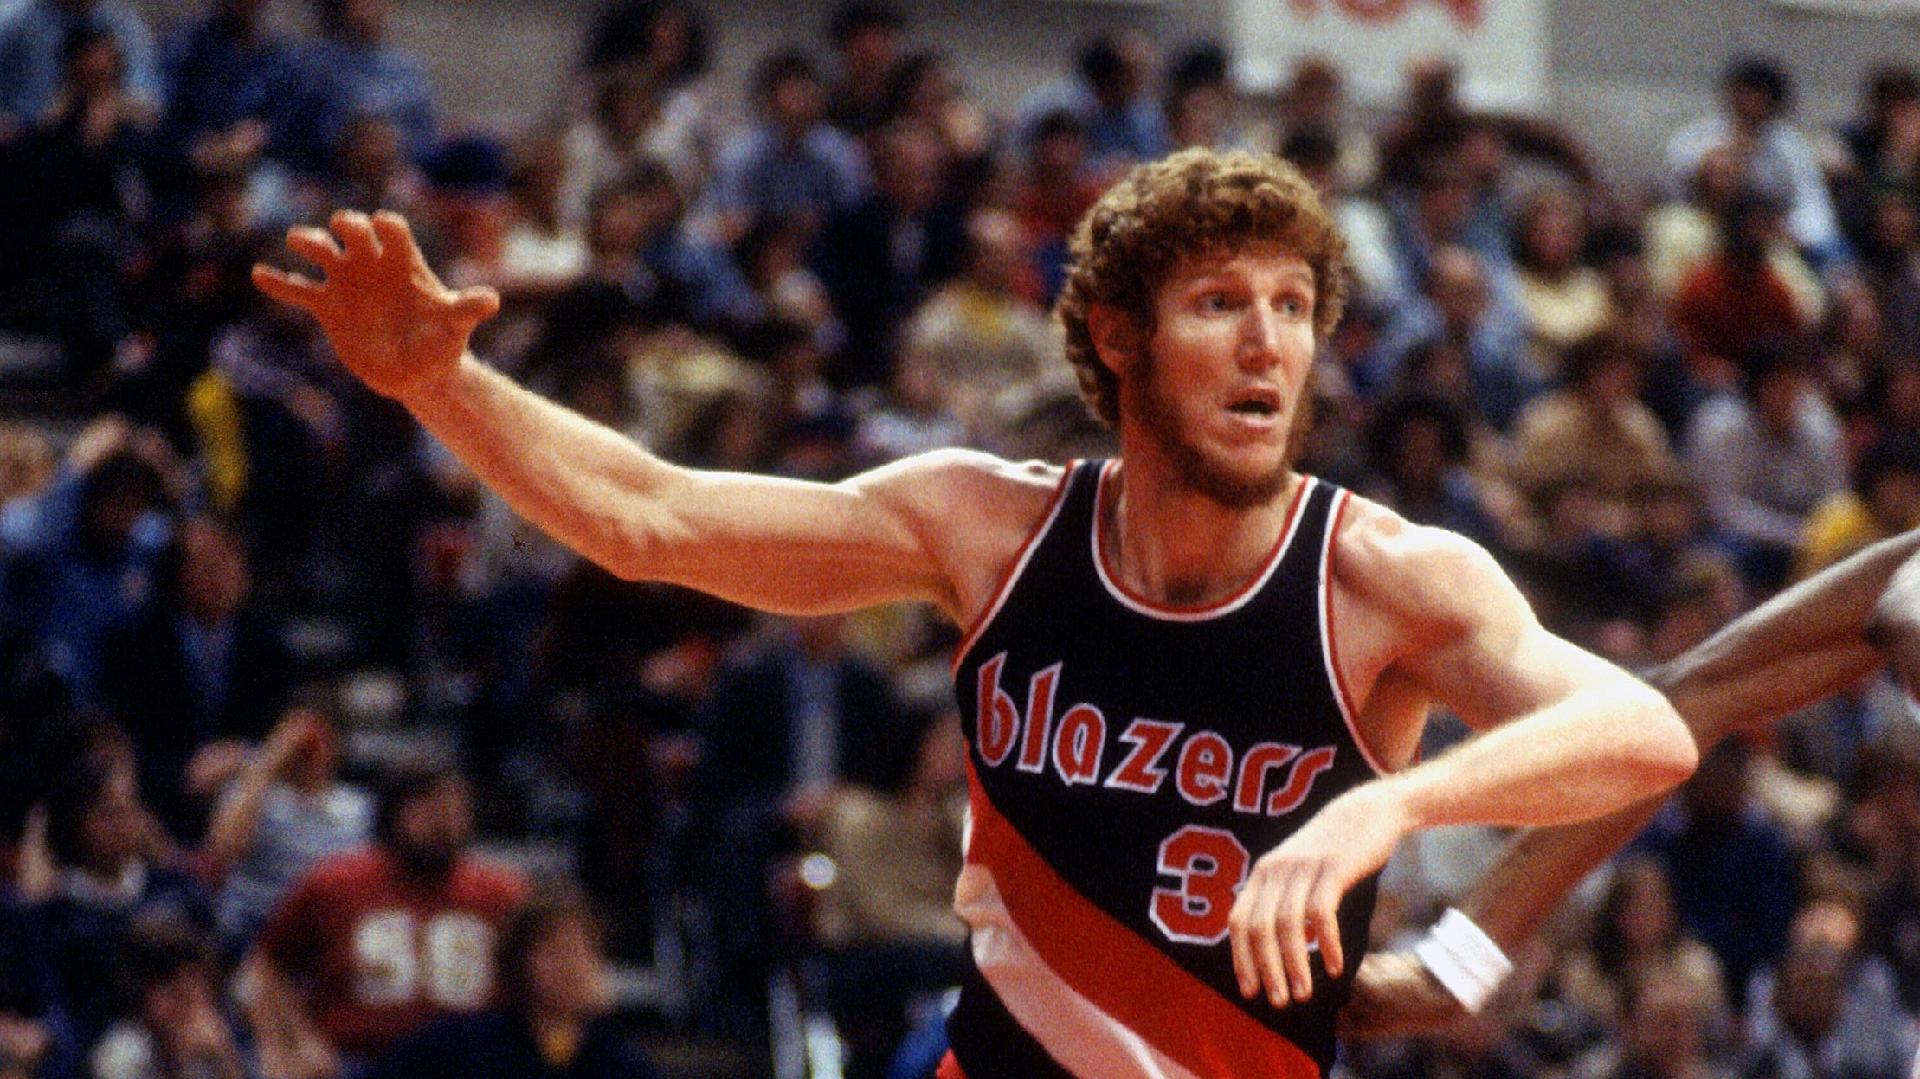 Injuries follow Bill Walton's career, but can't eclipse his greatness